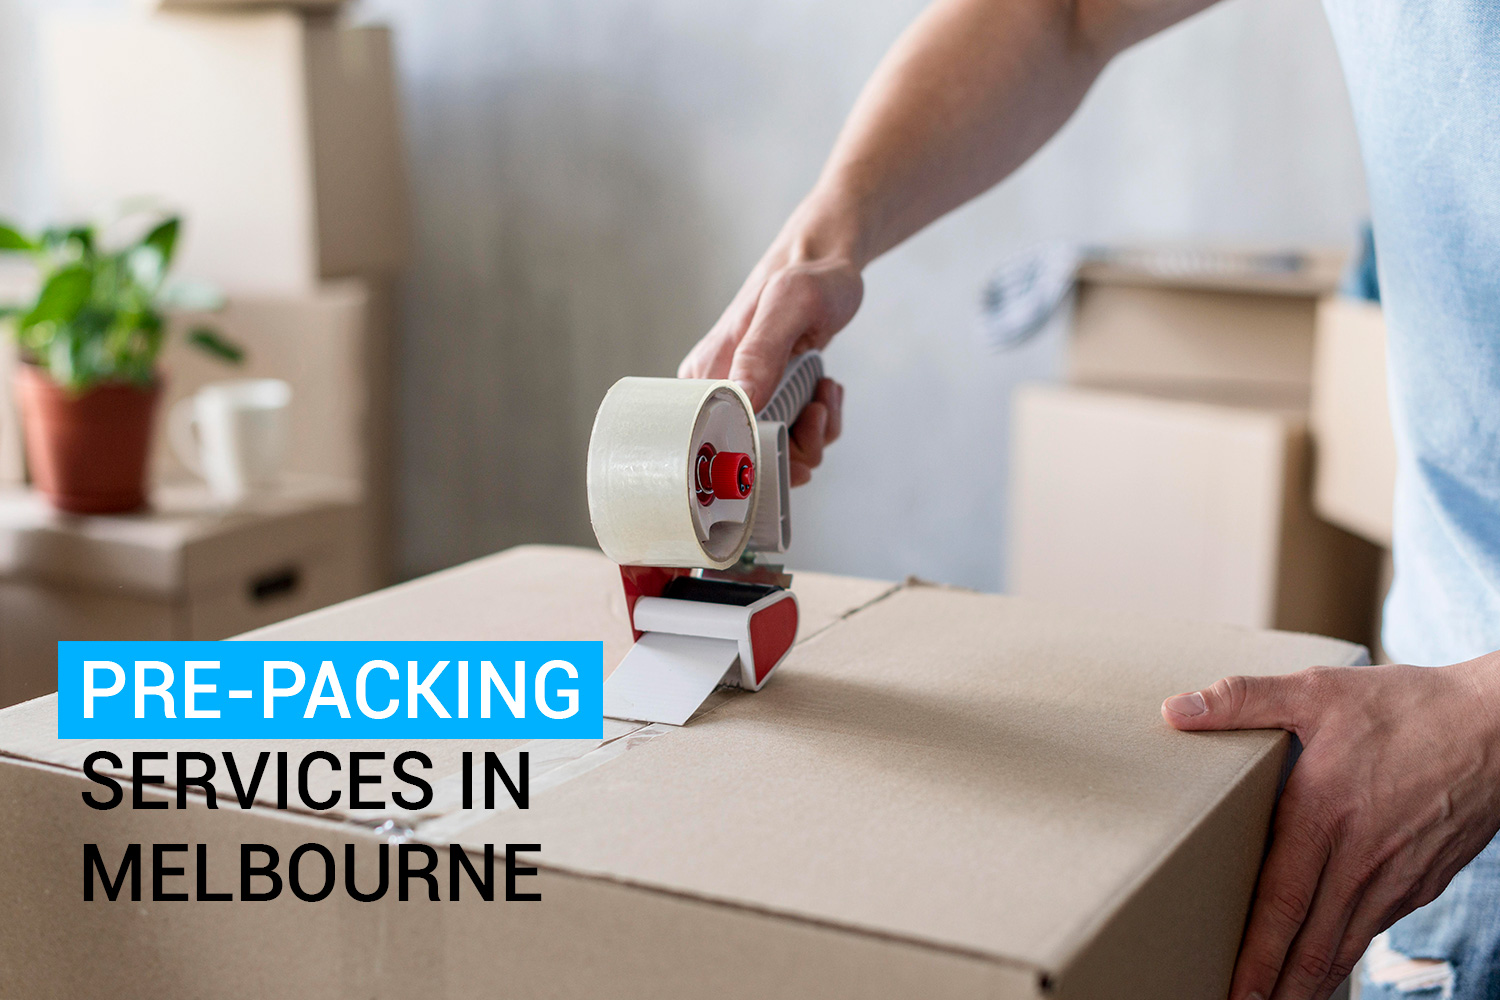 What to Expect from Pre-Packing Services in Melbourne: A Step-by-Step Guide